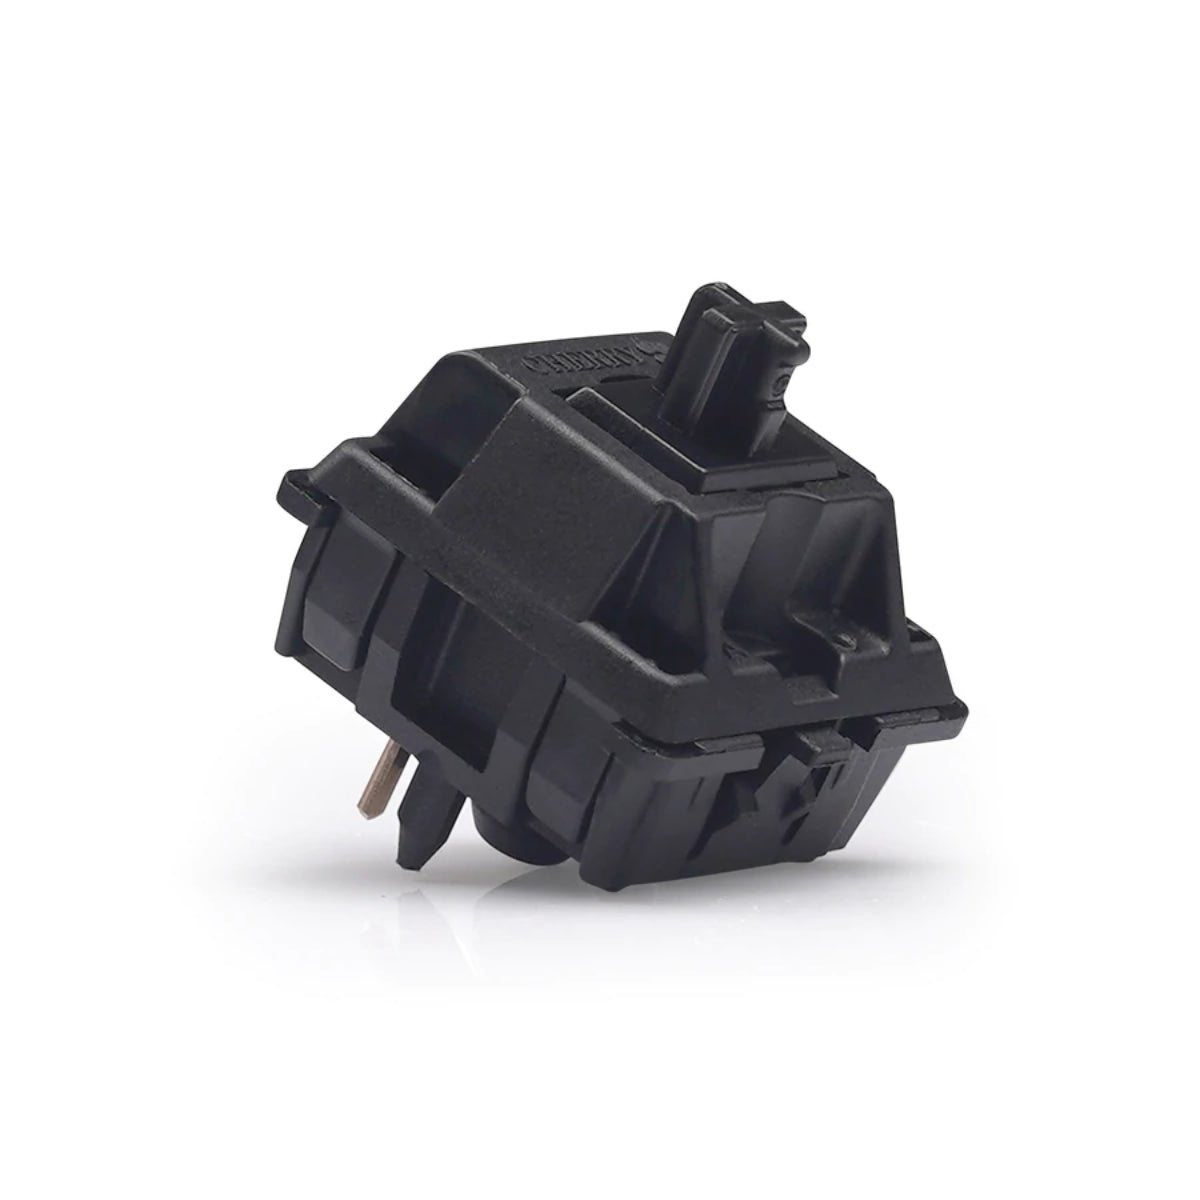 KBD Fans Cherry MX Hyperglide Liner Switches - Black - Store 974 | ستور ٩٧٤